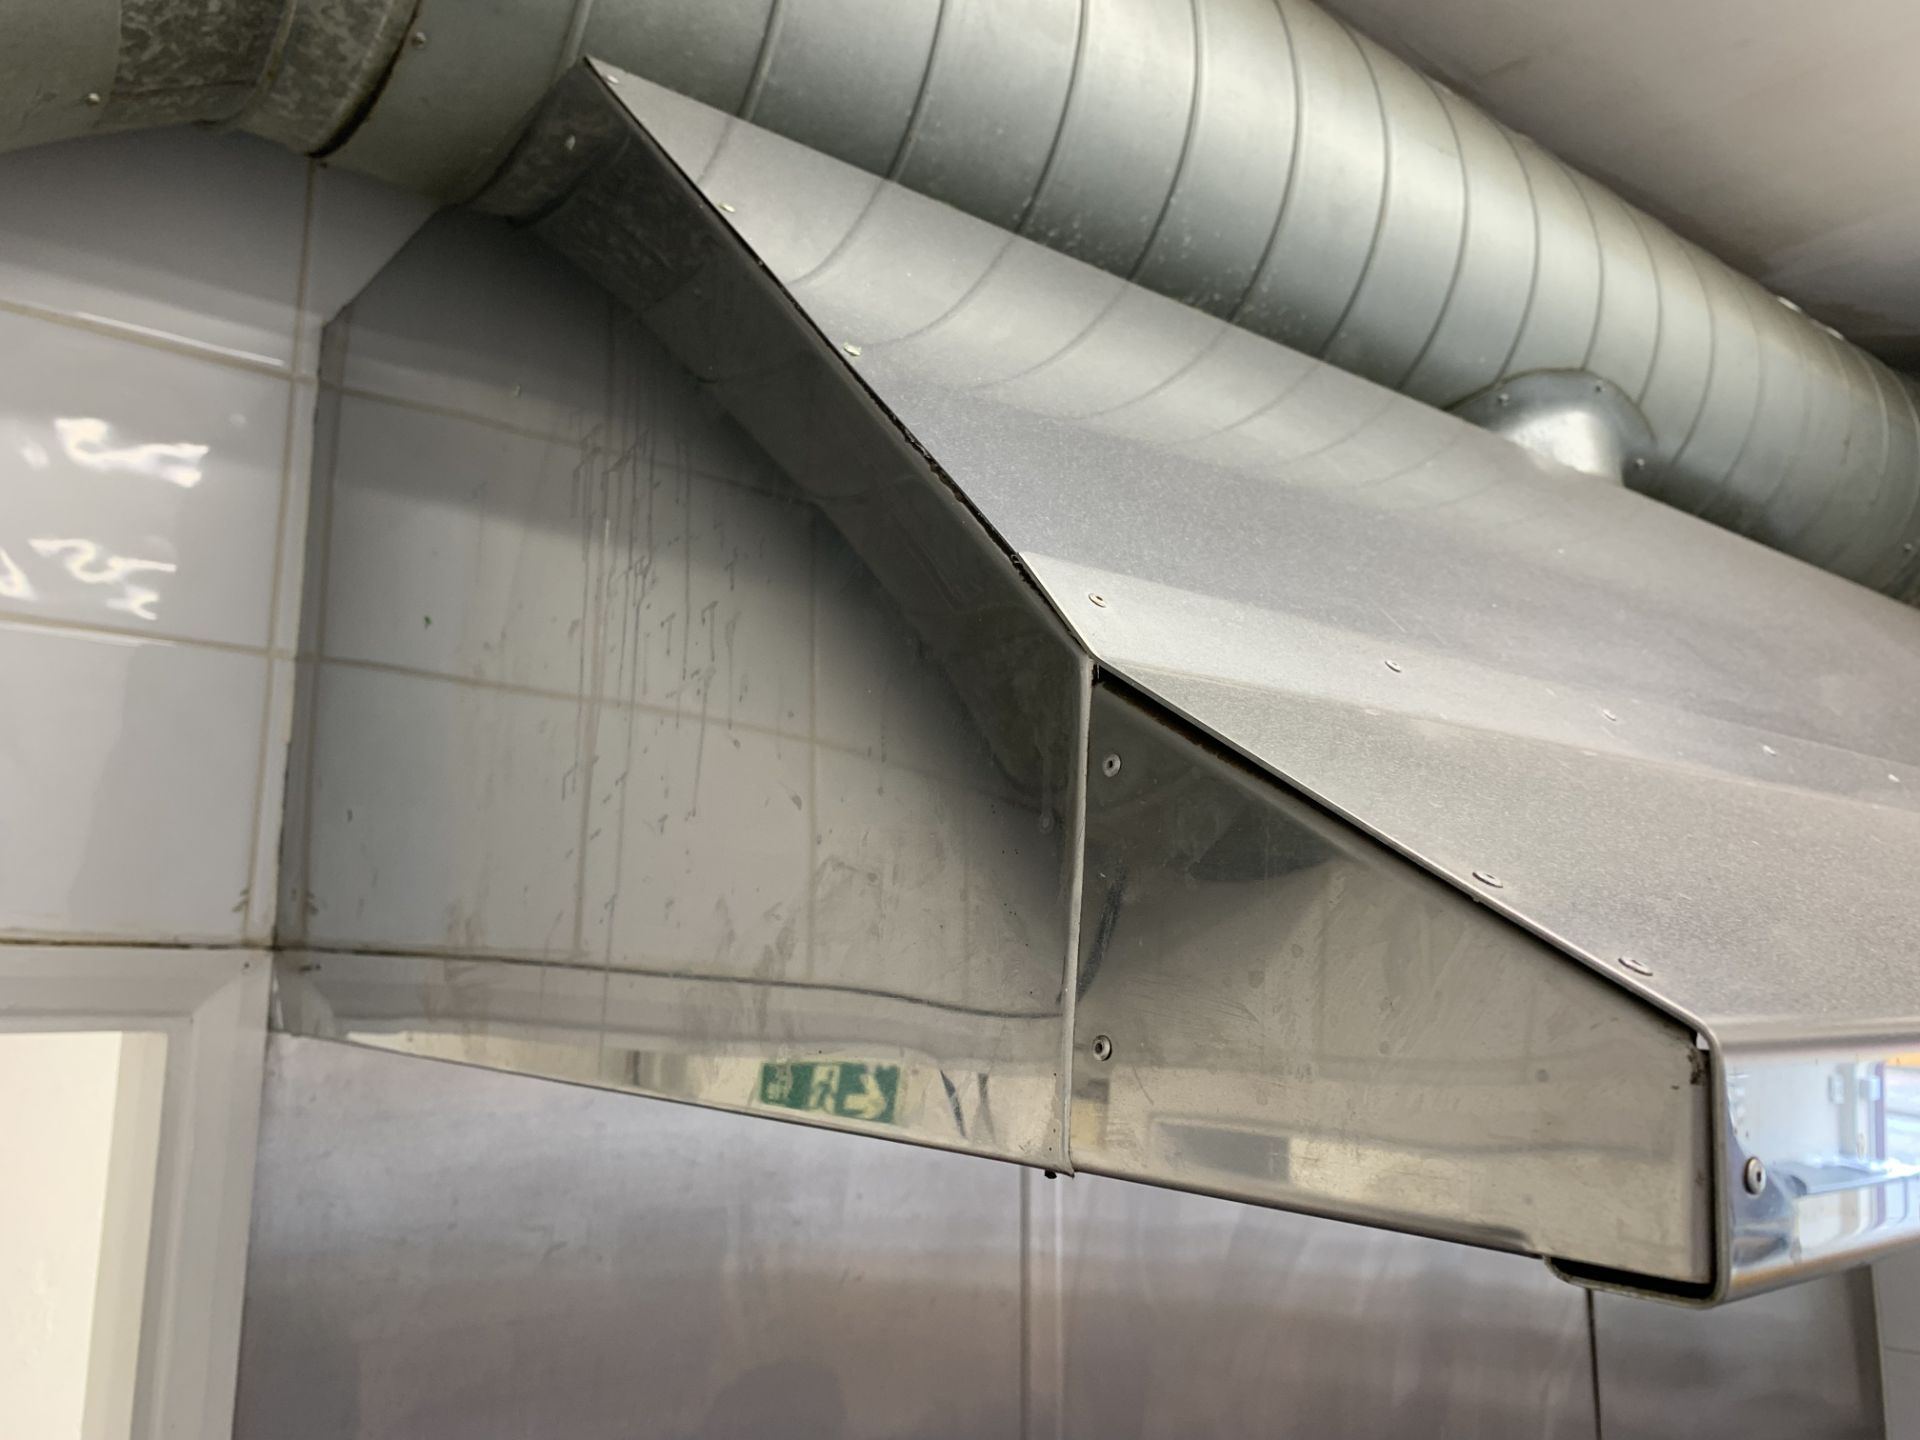 Stainless Steel Extraction Canopy with filters 183cm w x 96cm d x 50cm h - Image 2 of 4